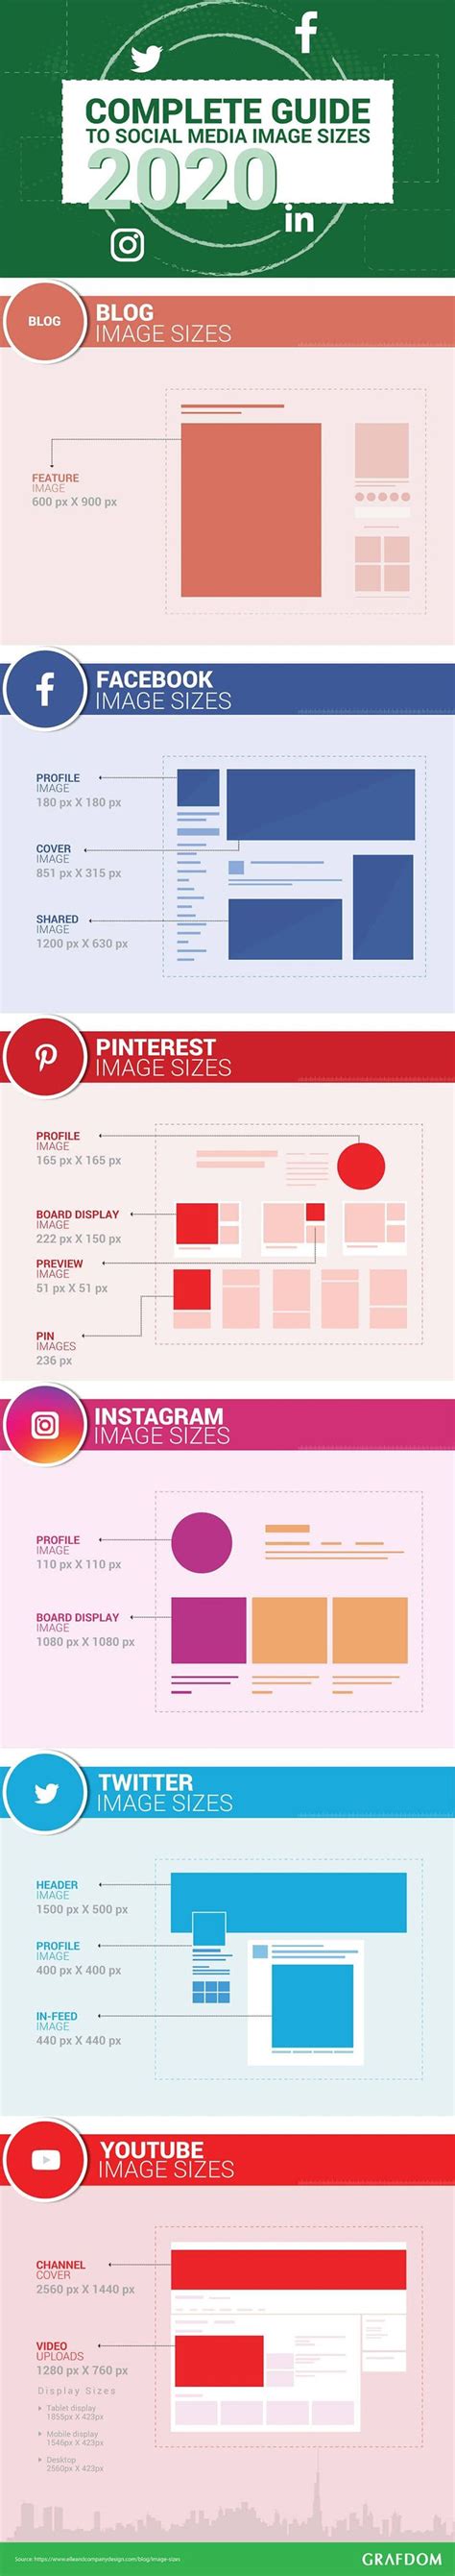 A Beginners Guide To Social Media Image Sizes For 2020 Social Media